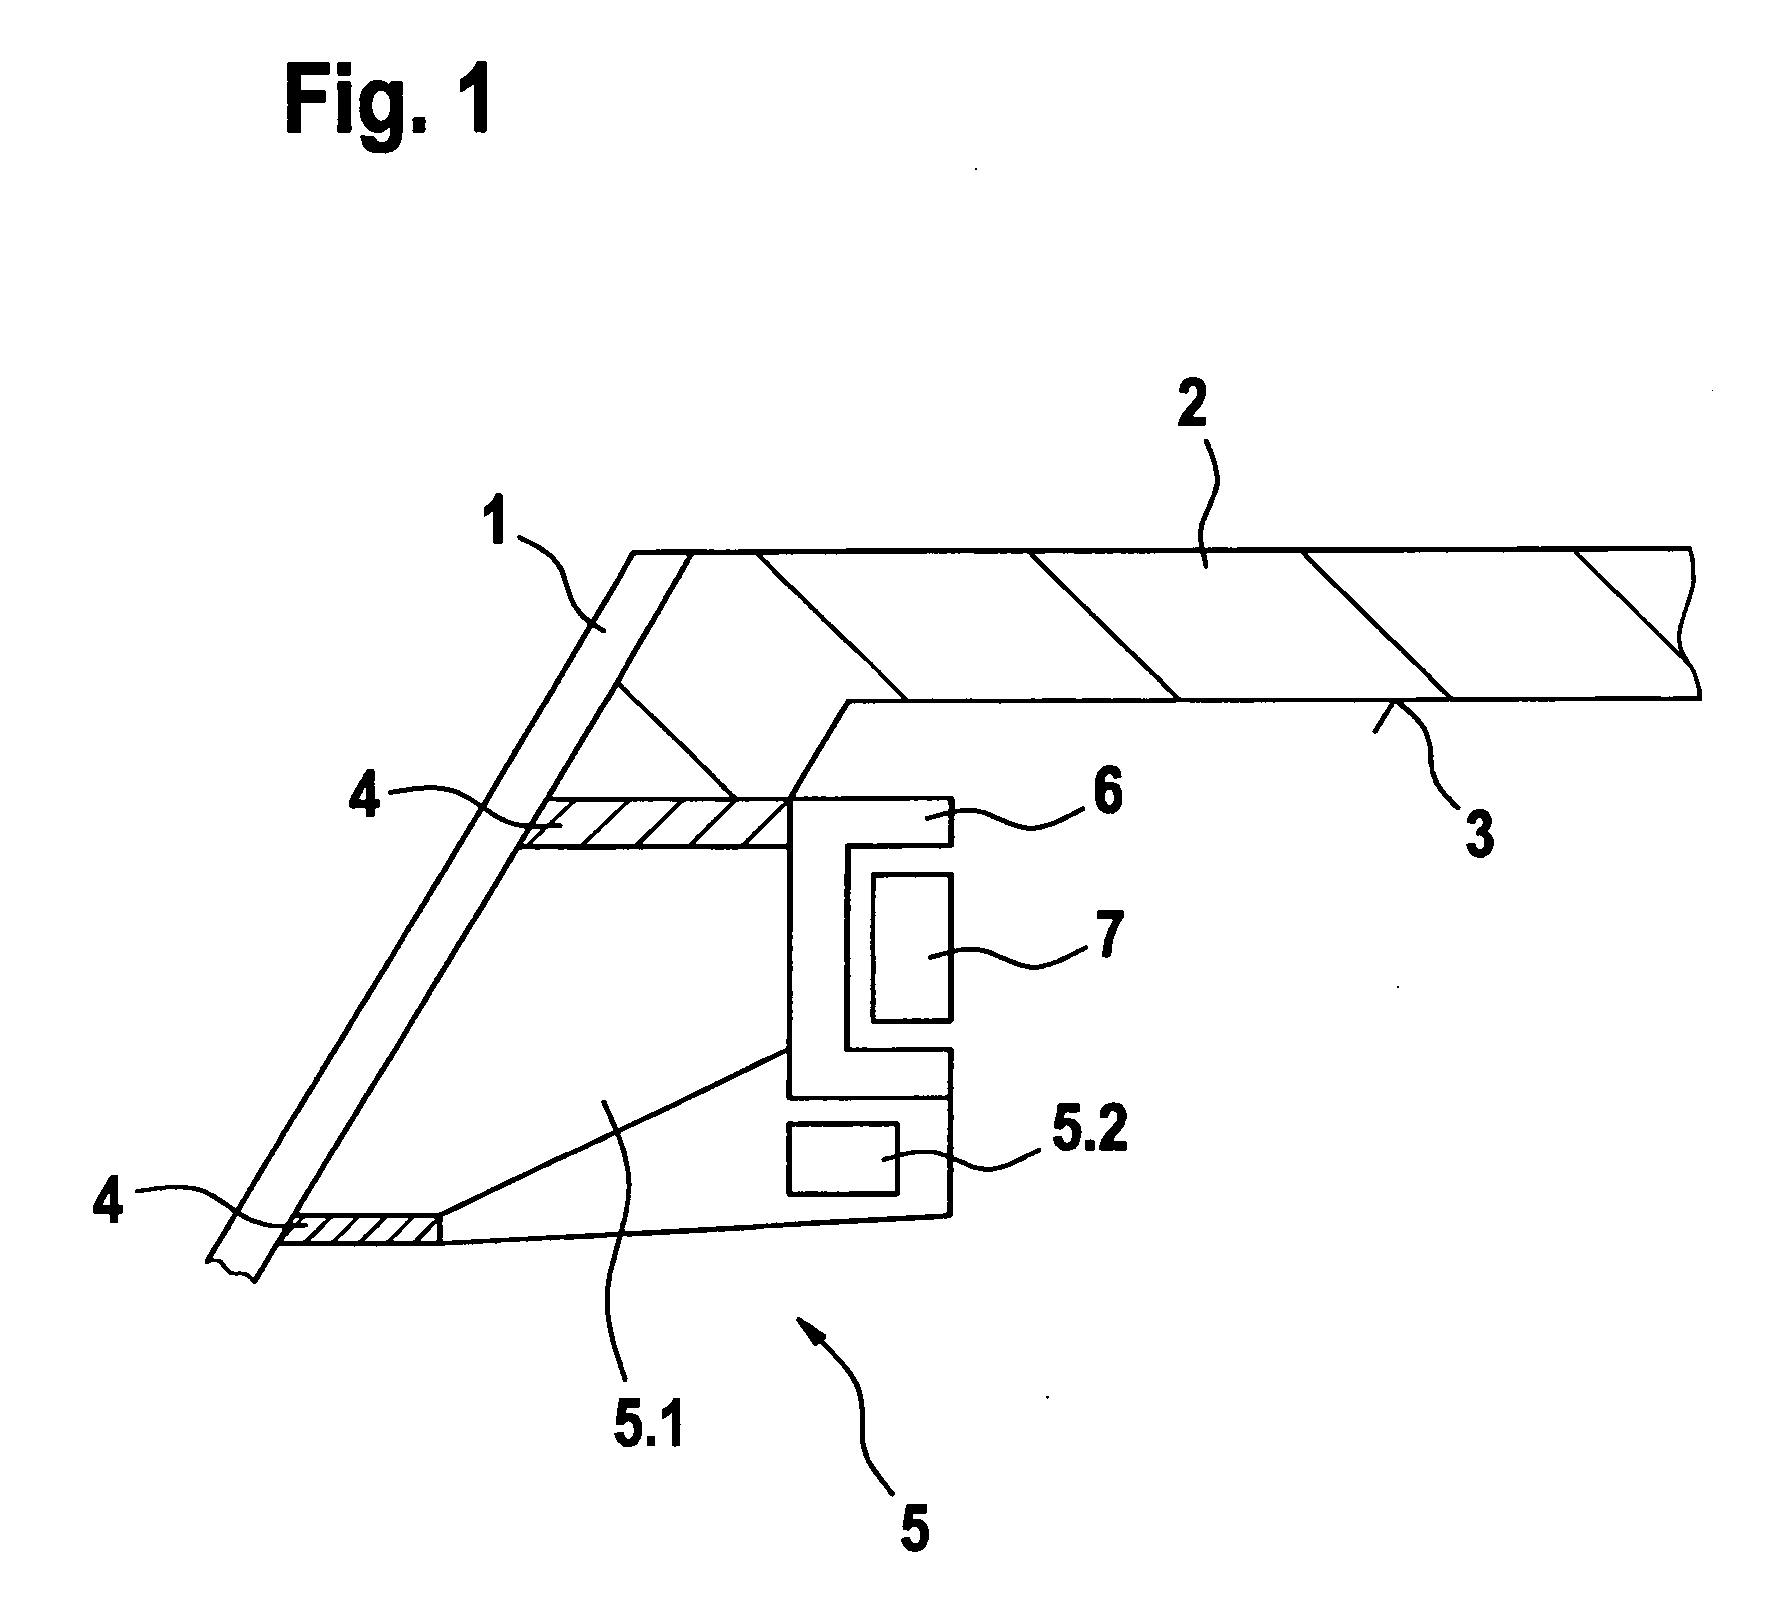 Image Capturing Device for a Driver Assistance System